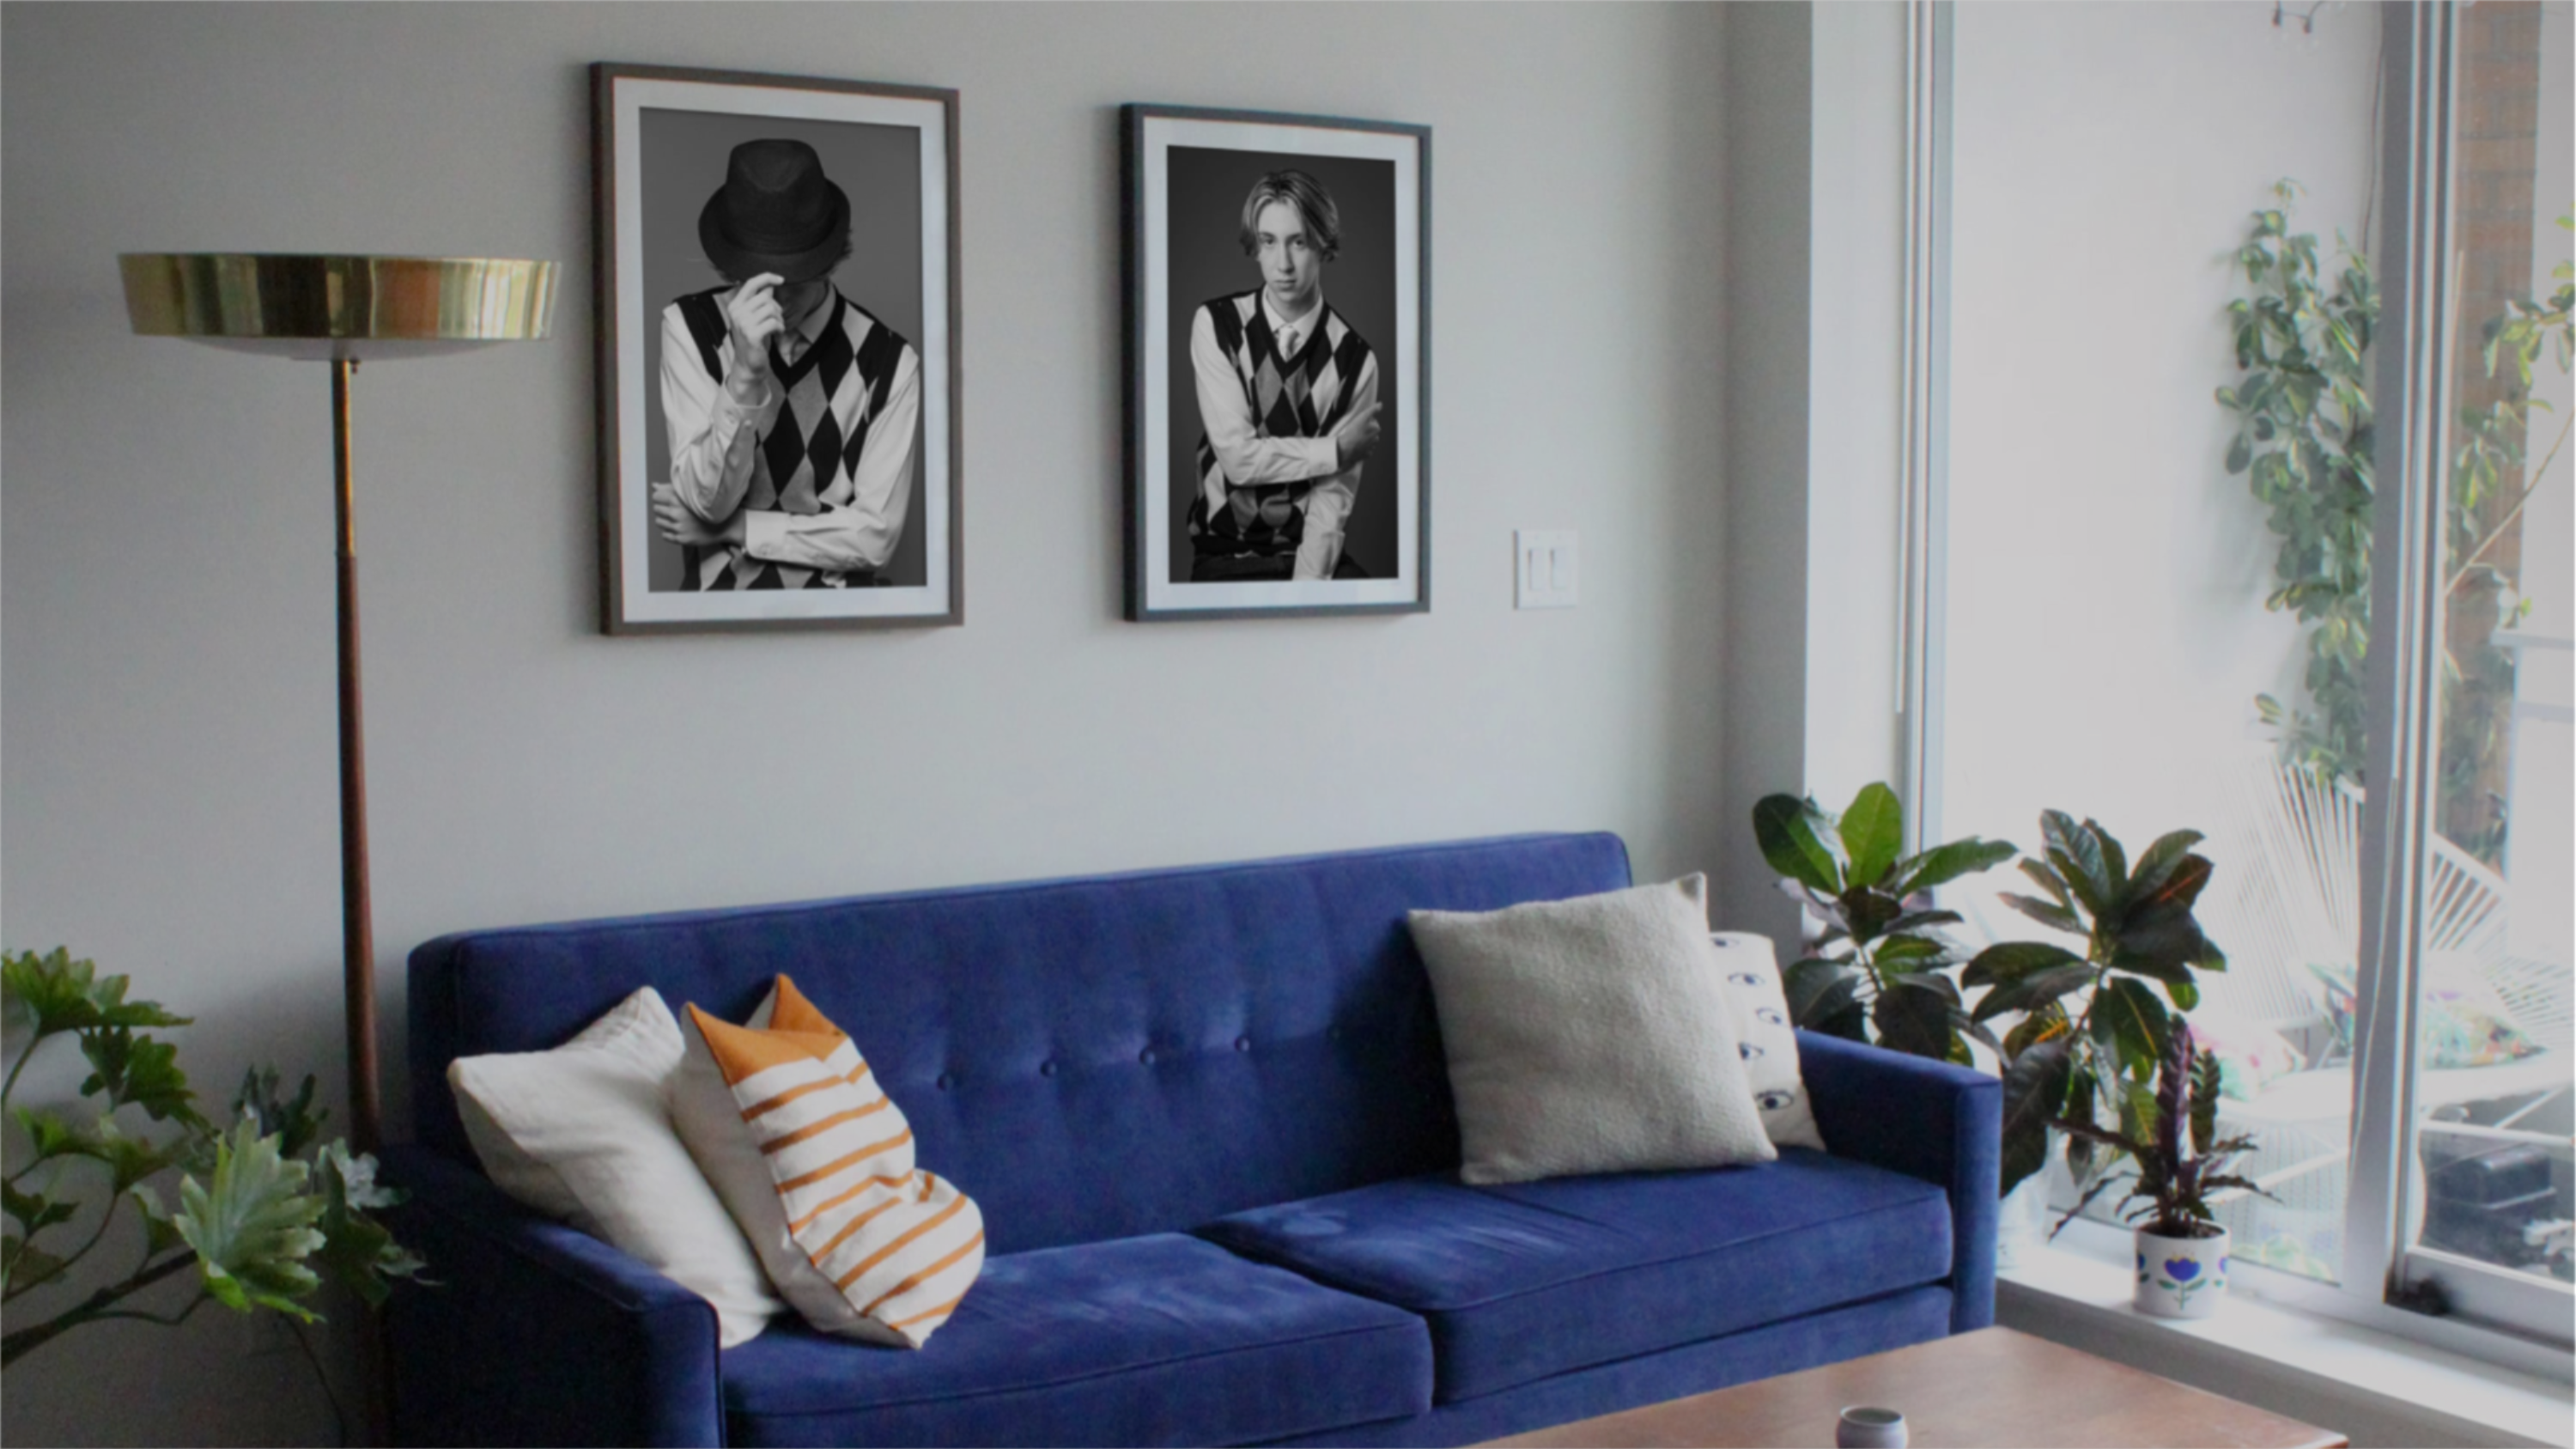 Corner view of a n interior space, wall art, blue couch with four pillows plants, coffee table, floor to ceiling windows looking out on an outdoor space with chair and plant.